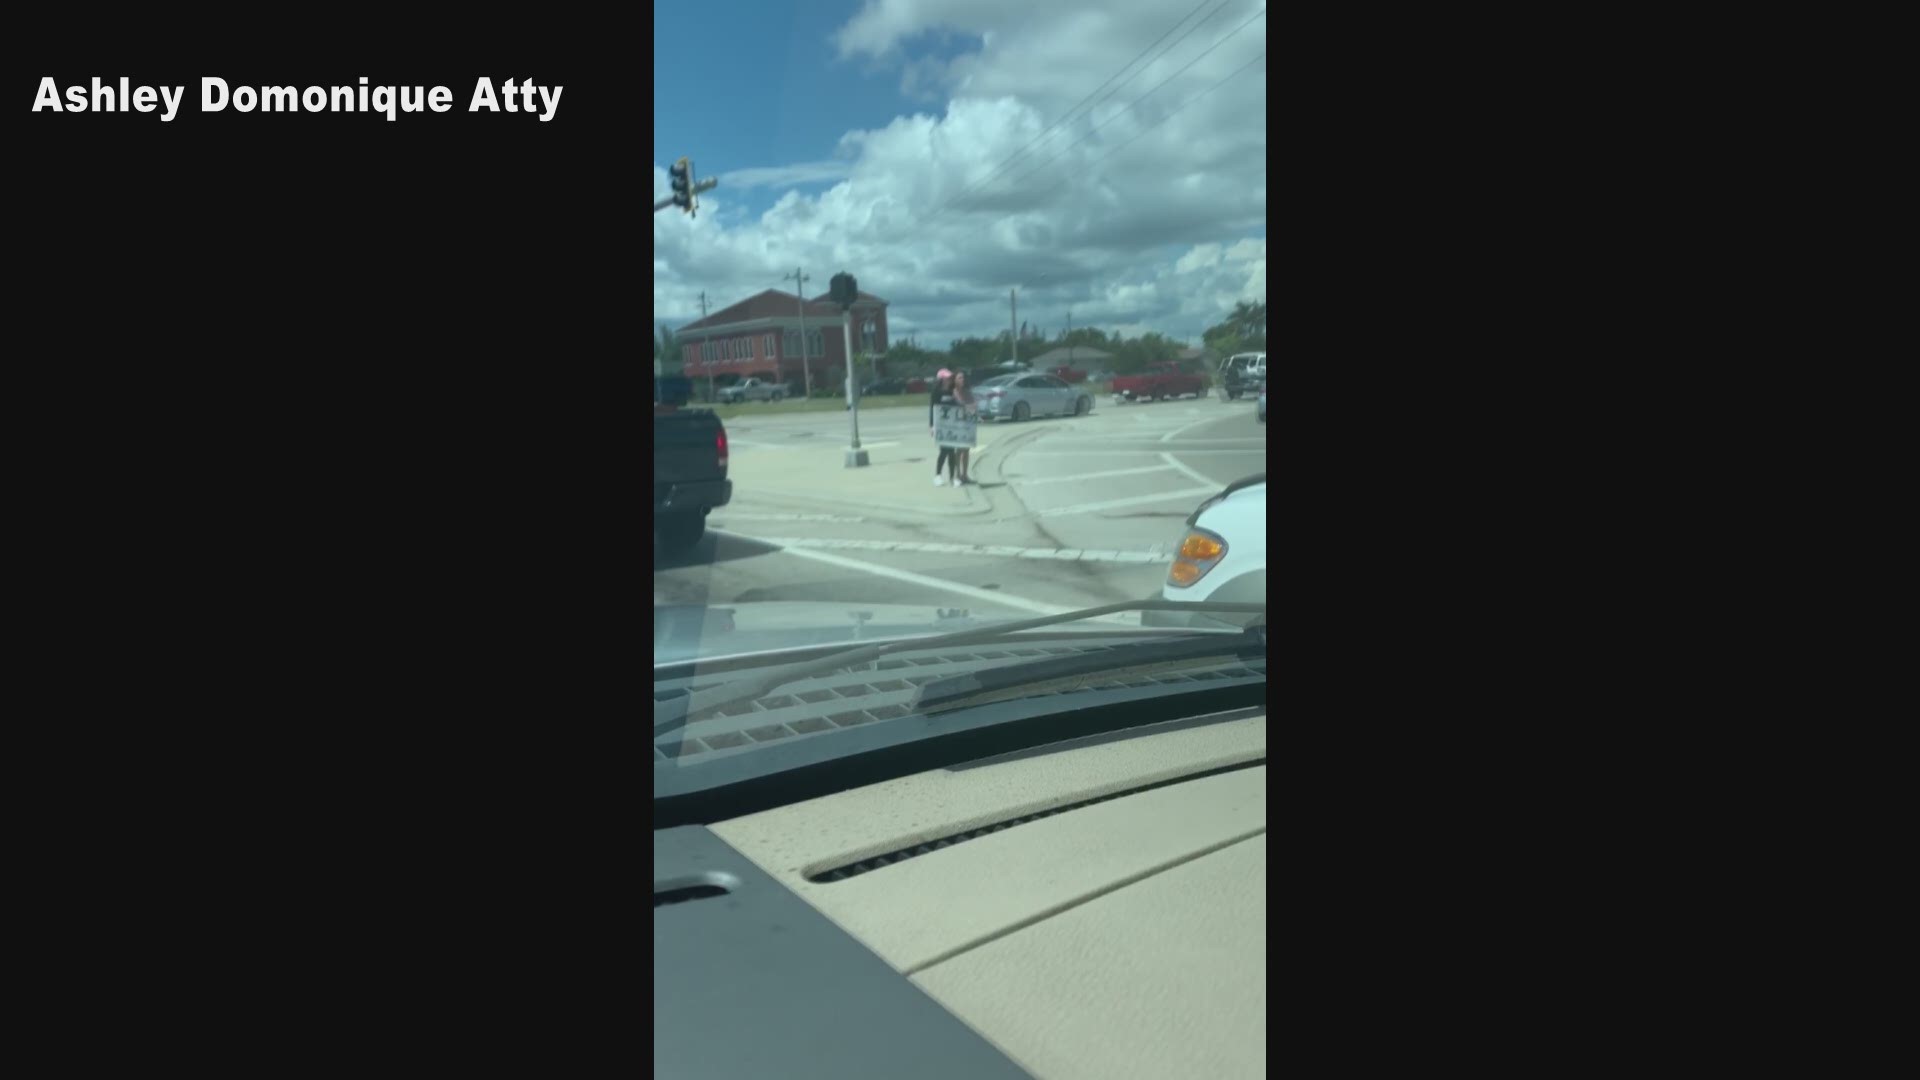 A Cape Coral mom is seen forcing her daughter to hold a sign at a busy intersection as punishment.